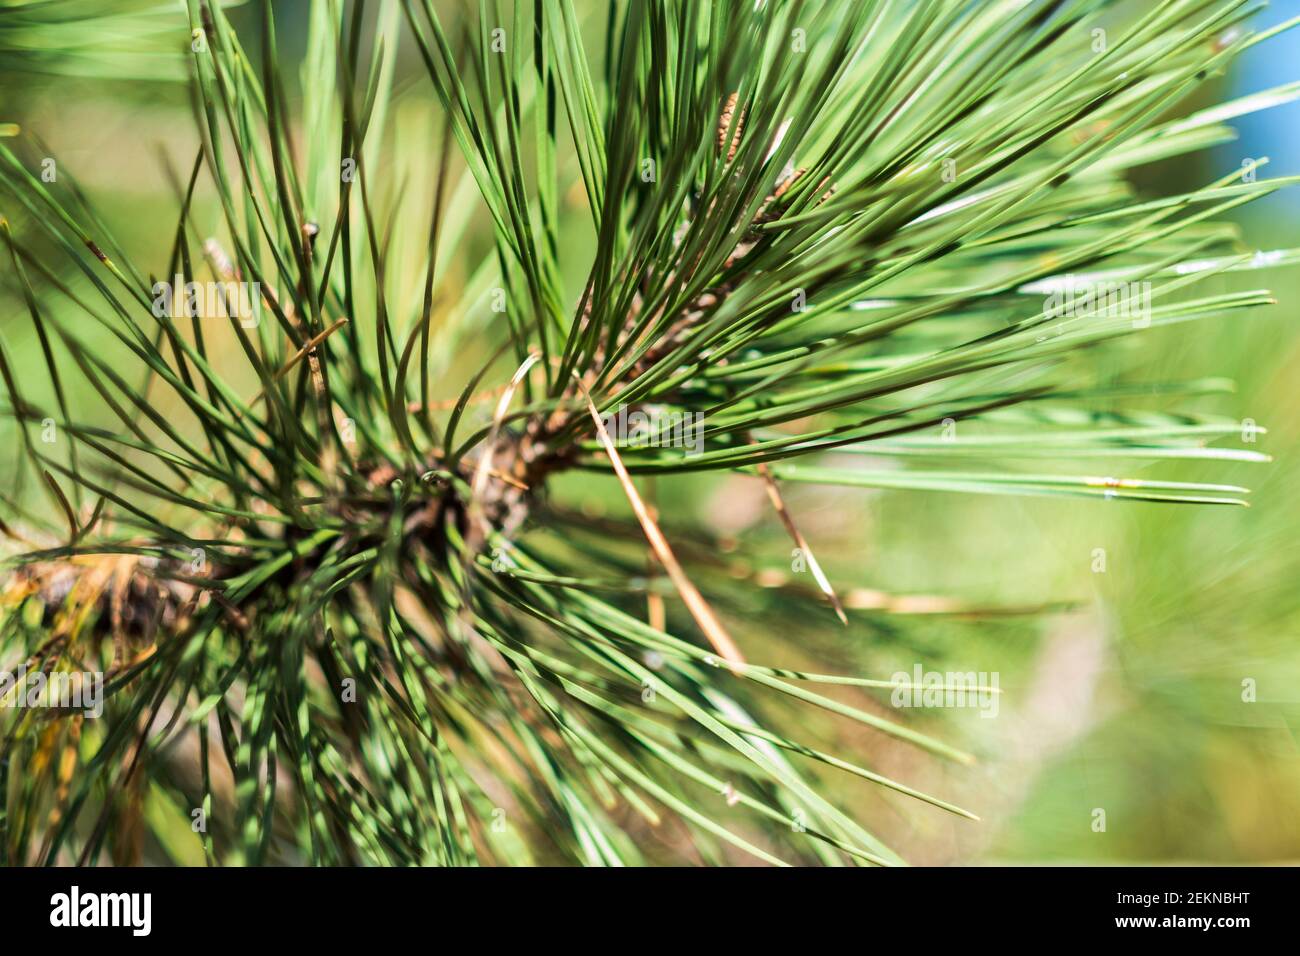 Closeup off the fascicles of an Austrian pine tree showing two-needle clusters, important for identification. USA. Stock Photo